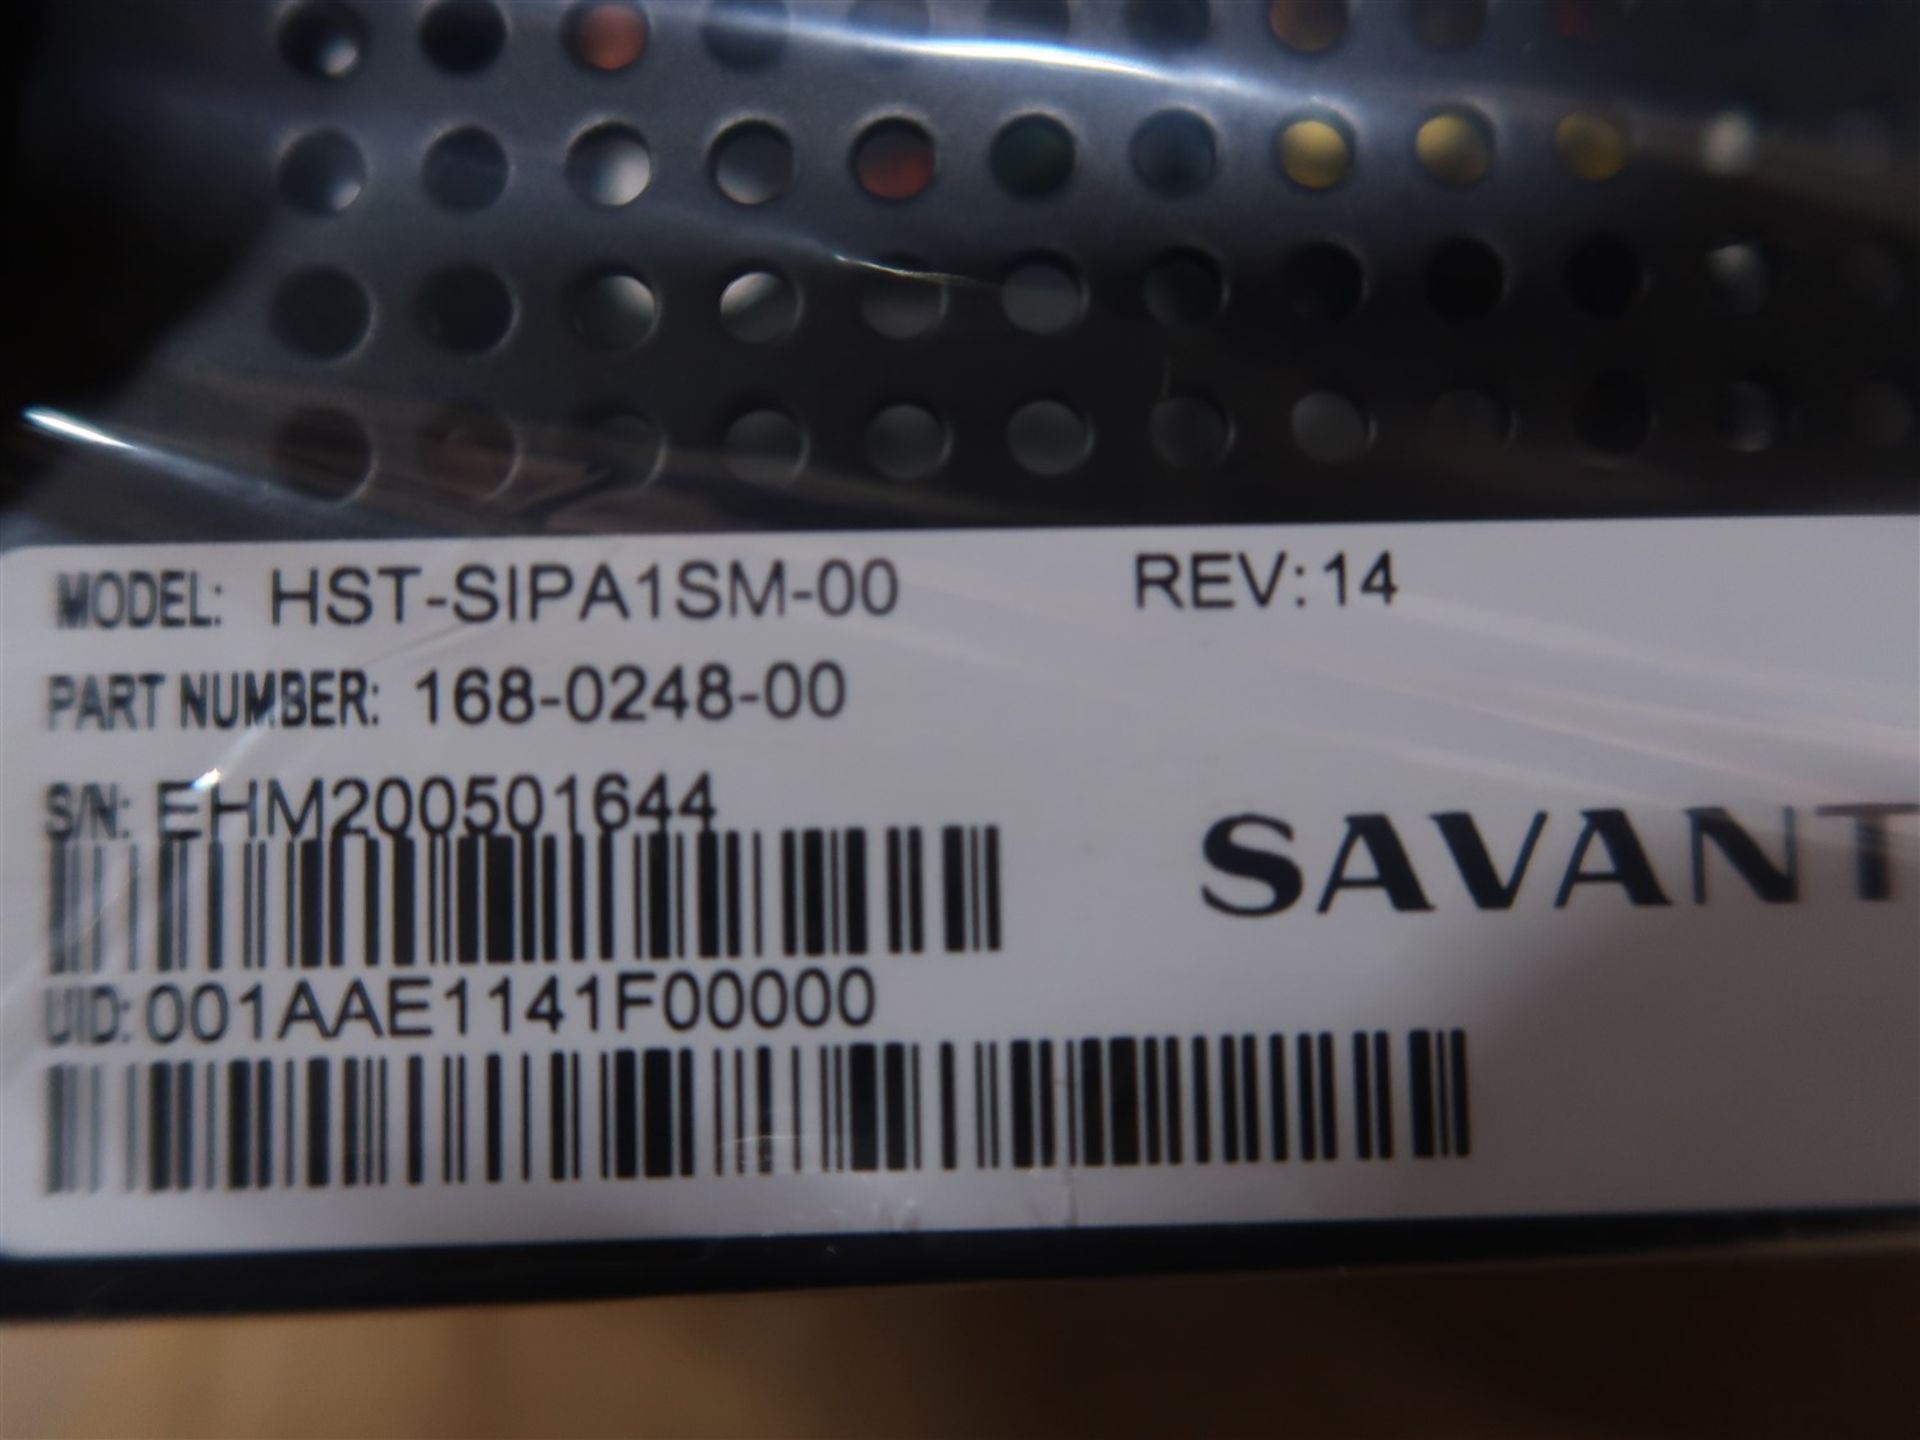 SAVANT HST-SIPAISM-00 WIFI STREAMING AUDIO DEVICE - Image 2 of 3